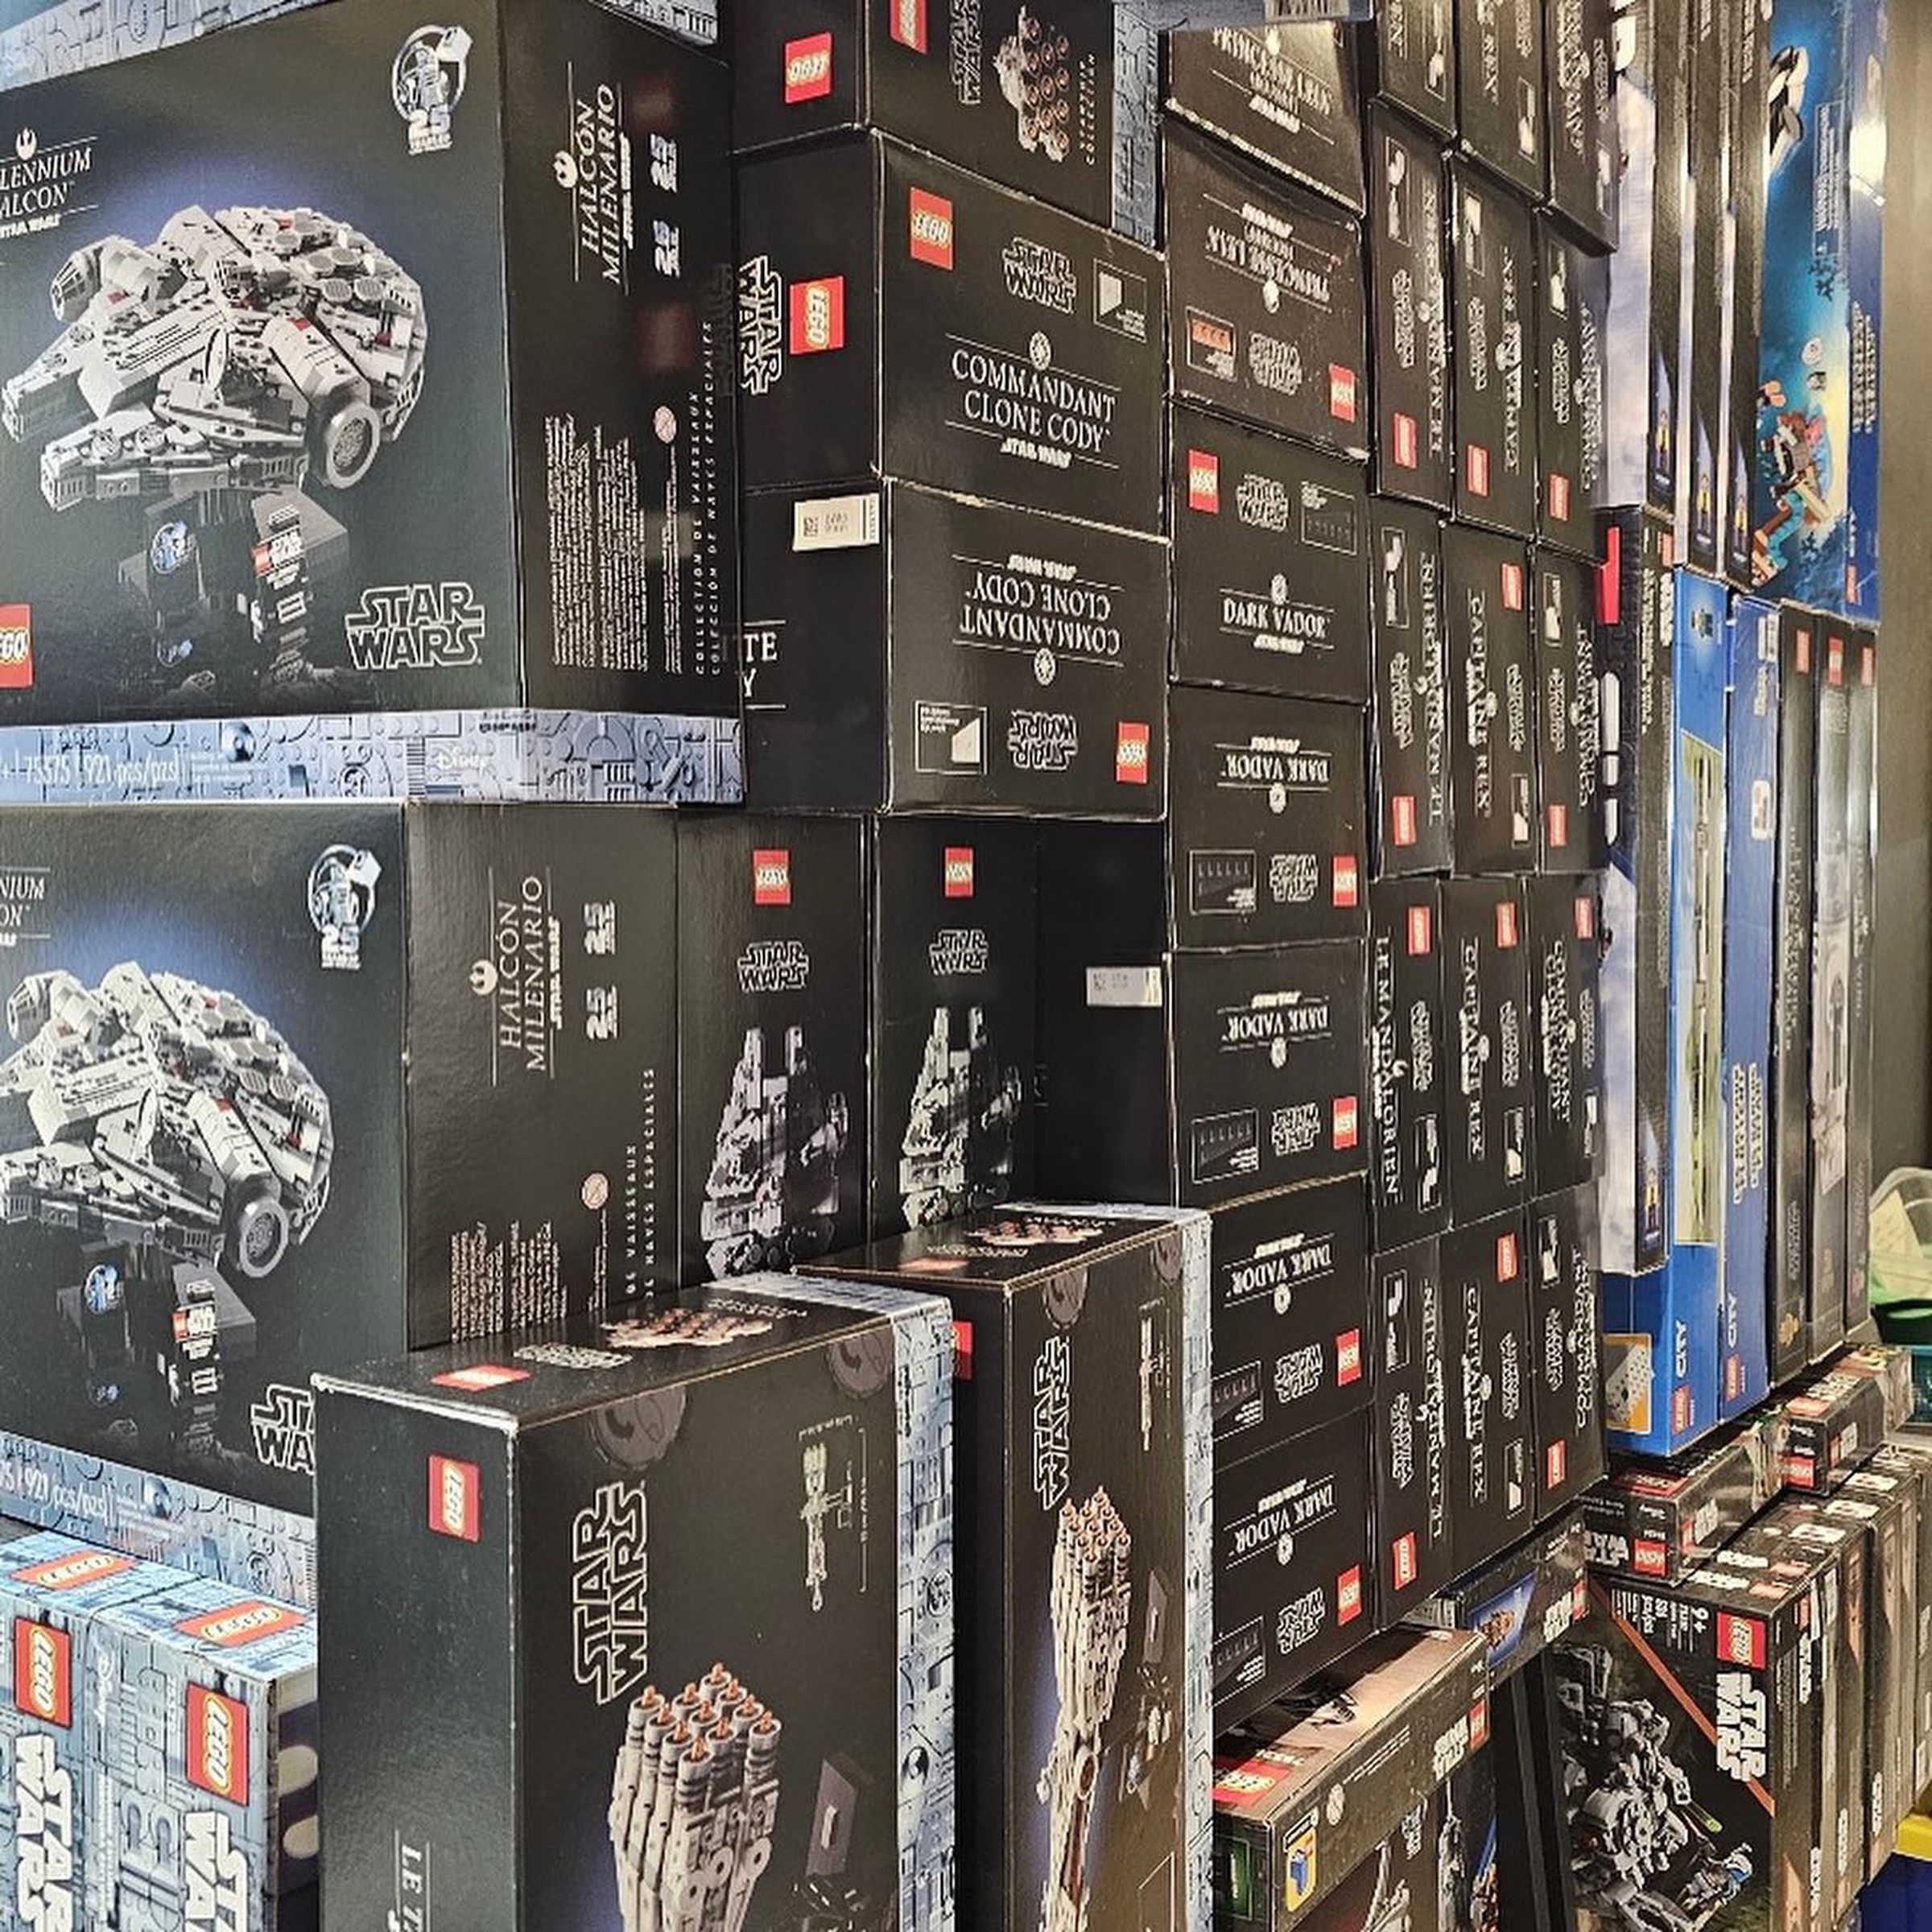 An image of stolen Star Wars Lego kits.